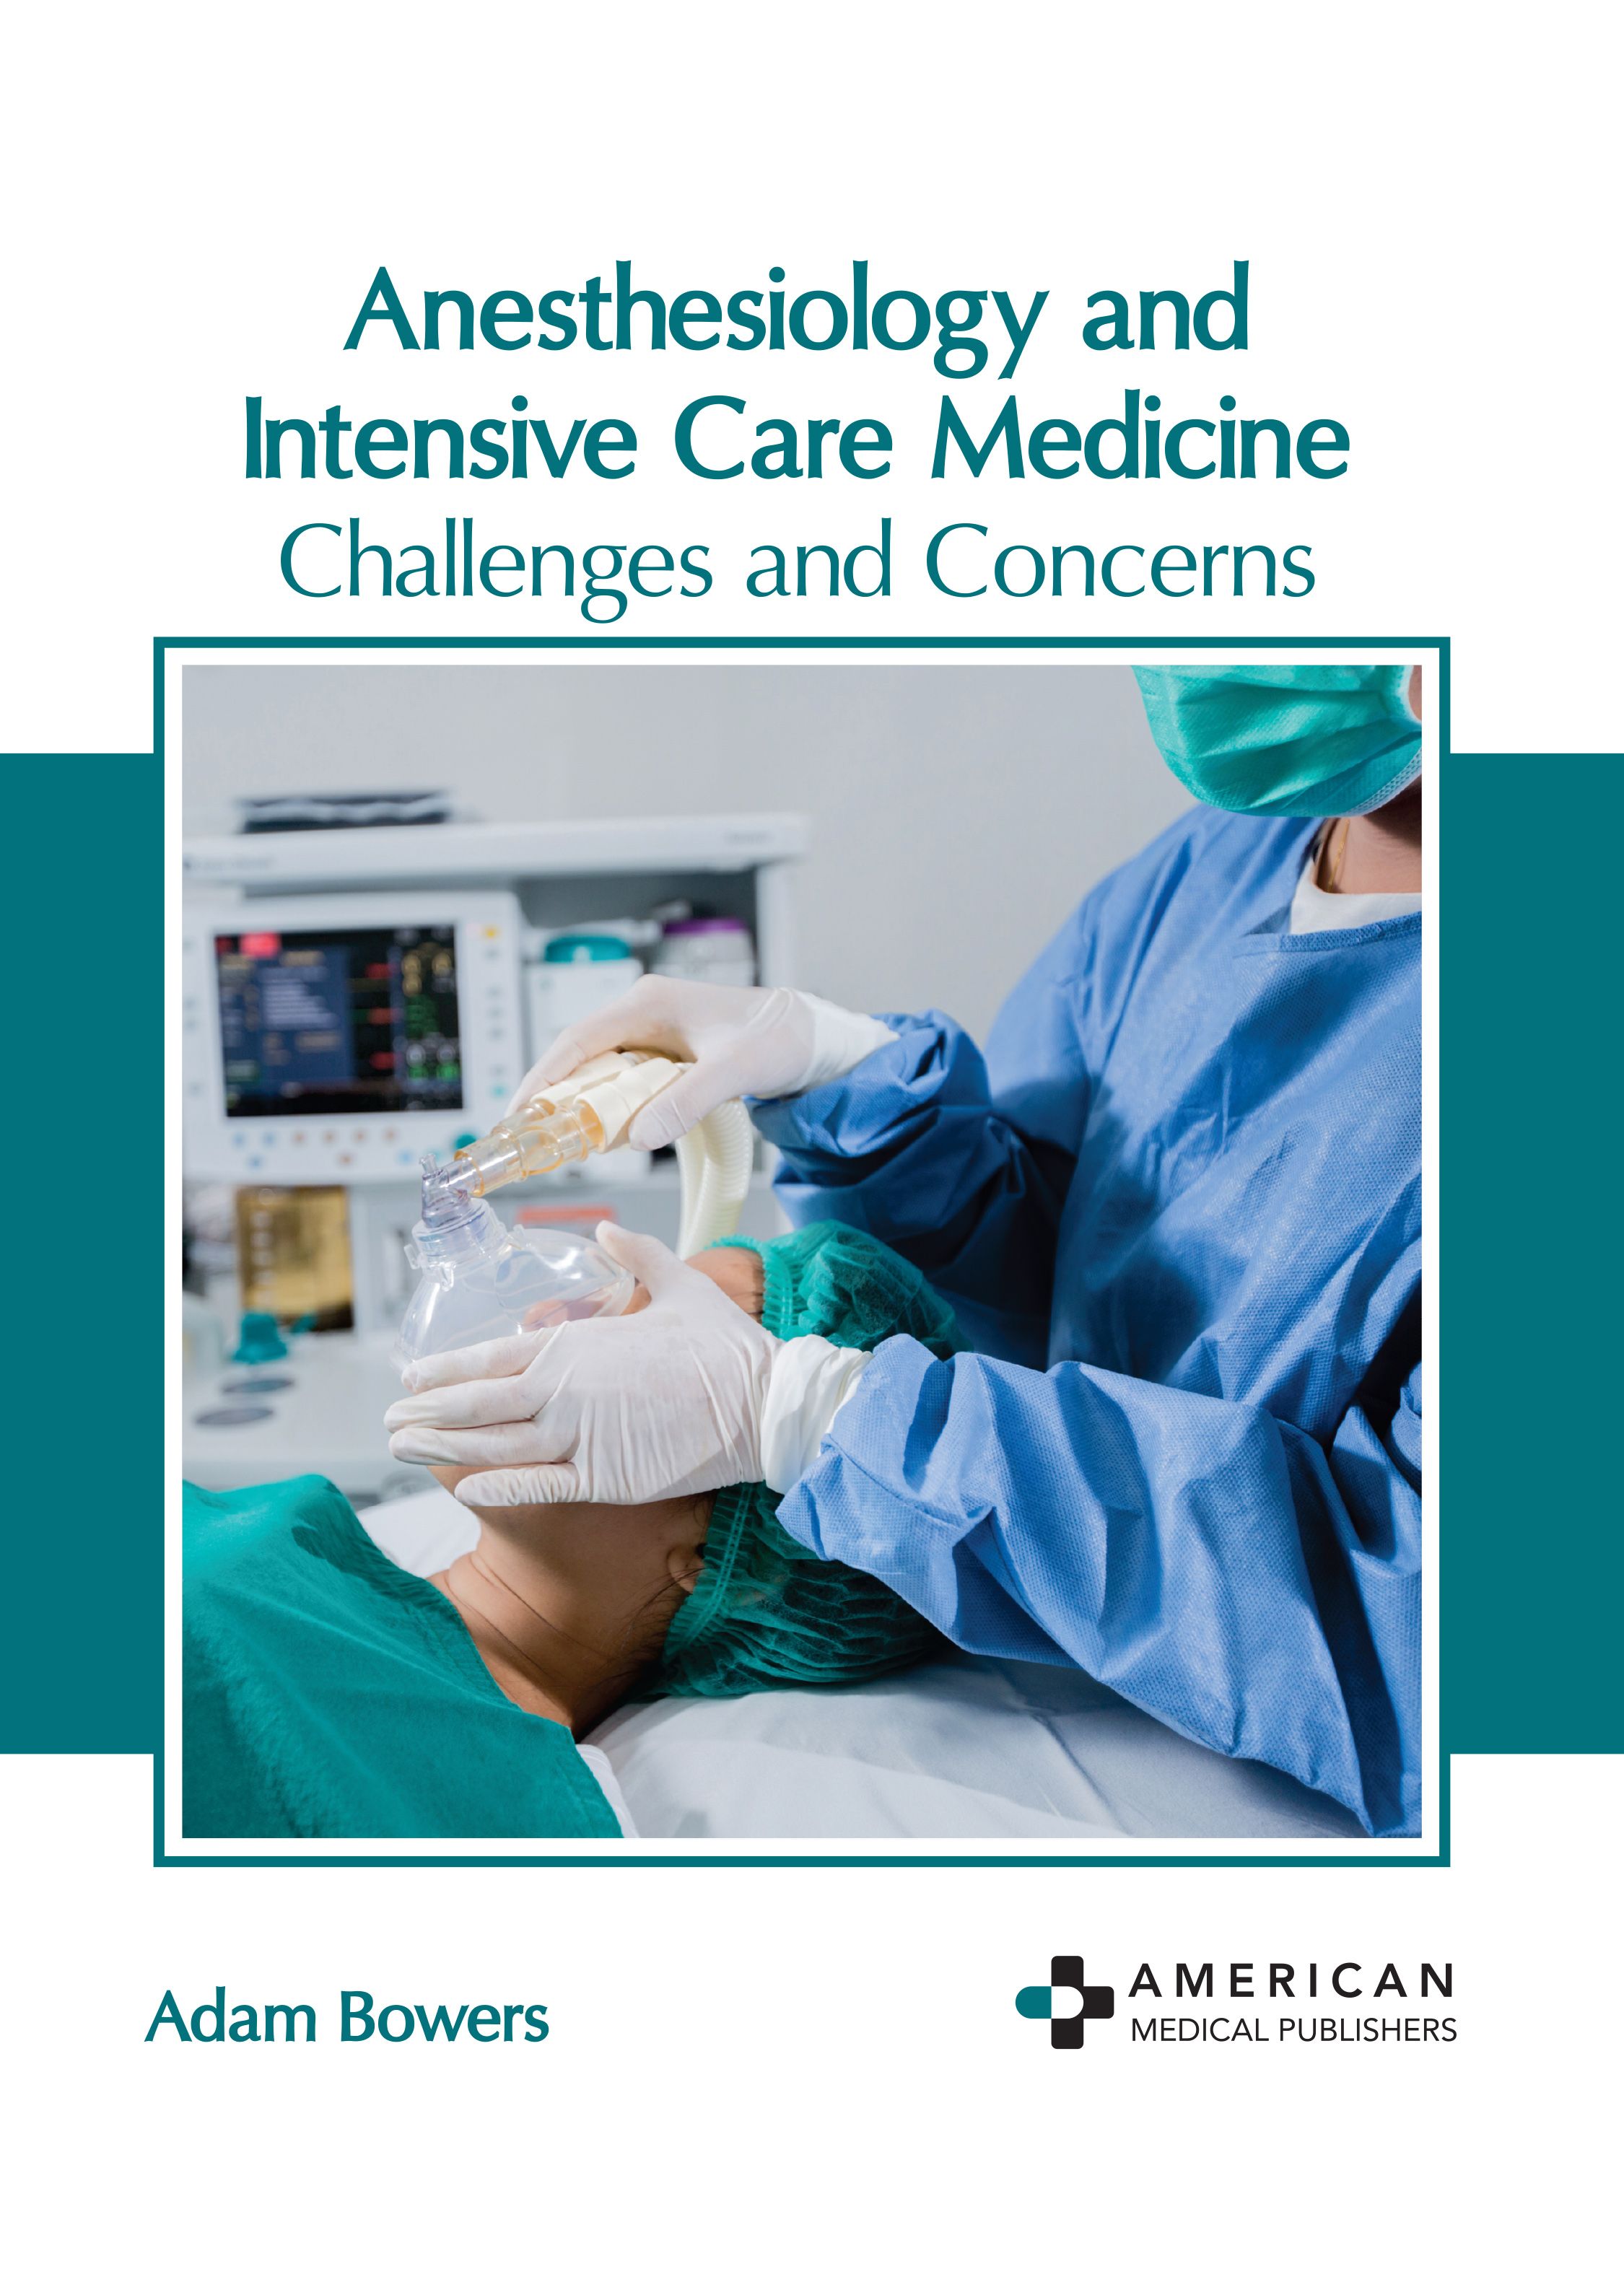 

exclusive-publishers/american-medical-publishers/anesthesiology-and-intensive-care-medicine-challenges-and-concerns-9781639278732